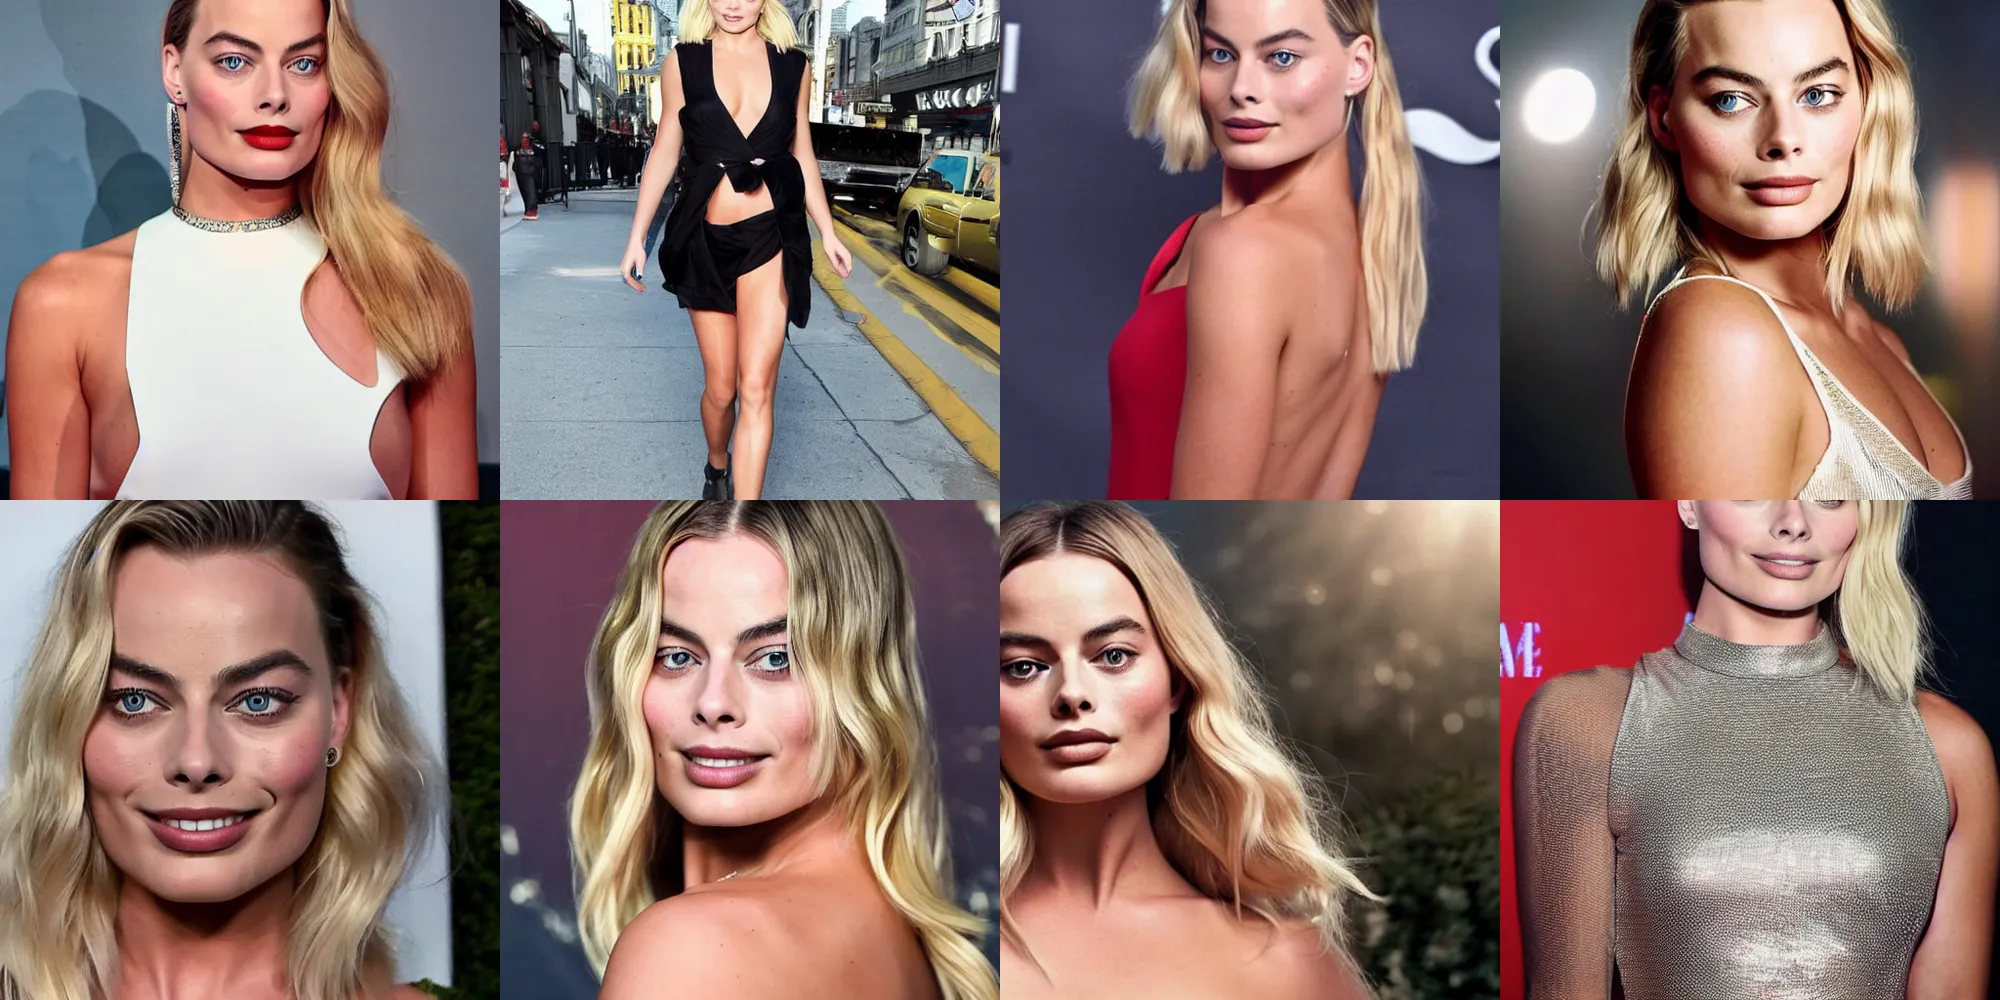 Prompt: margot robbie is a glowing dream goddess from heaven, no cap